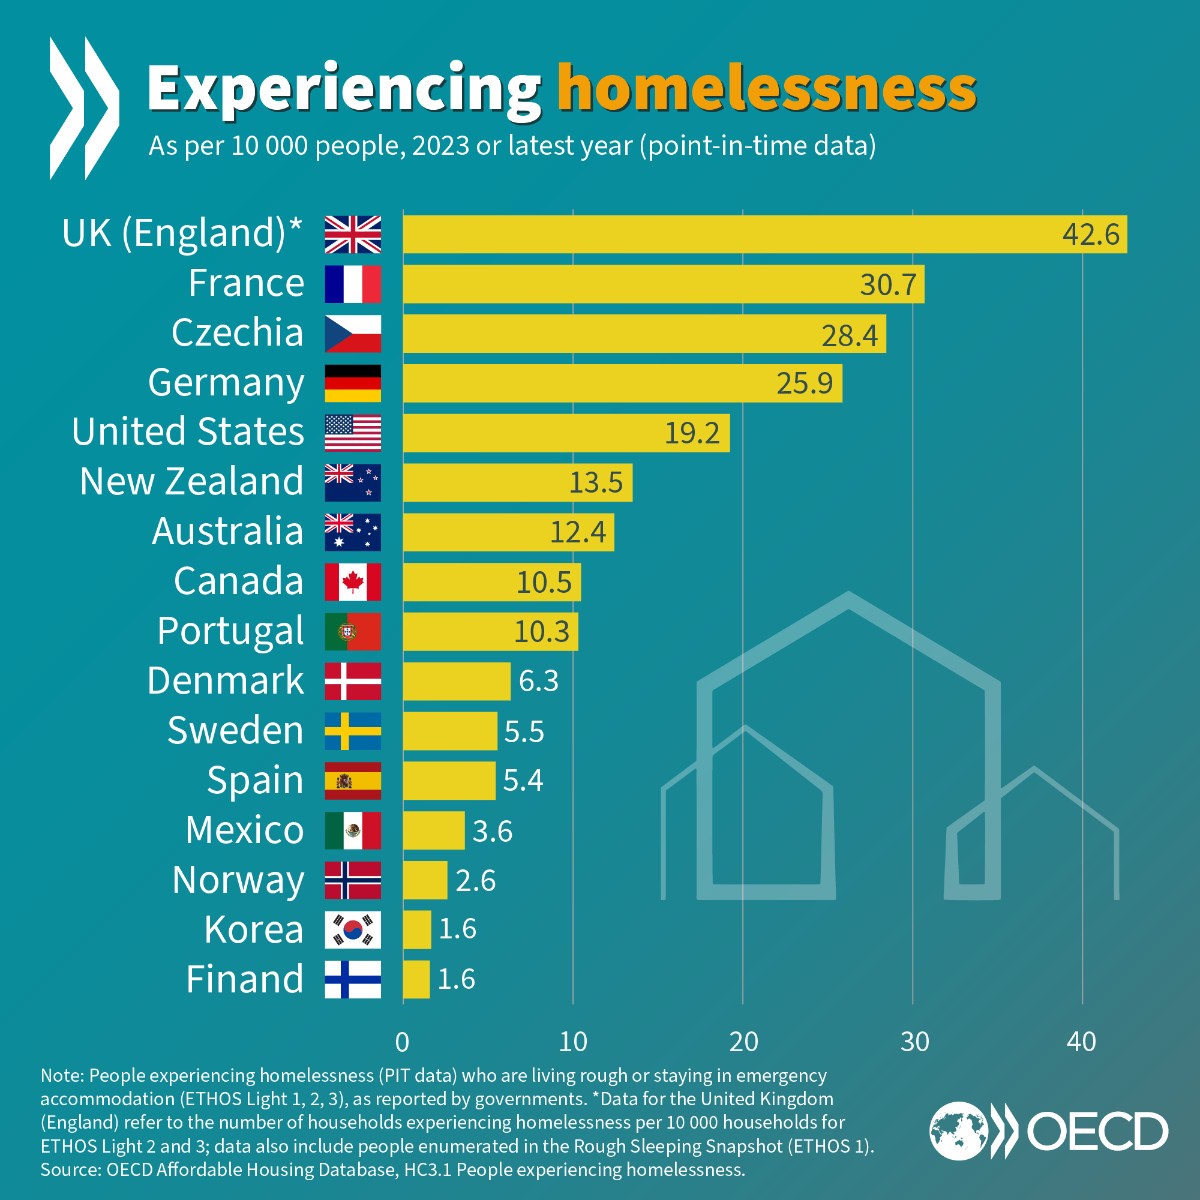 Over 2 million people are experiencing homelessness, but rates differ around the world. Dive into the complexities of tracking and comparing #homelessness data in 40 countries the OECD Affordable Housing Database. ➡️ brnw.ch/21wJLdm | @OECD_Social